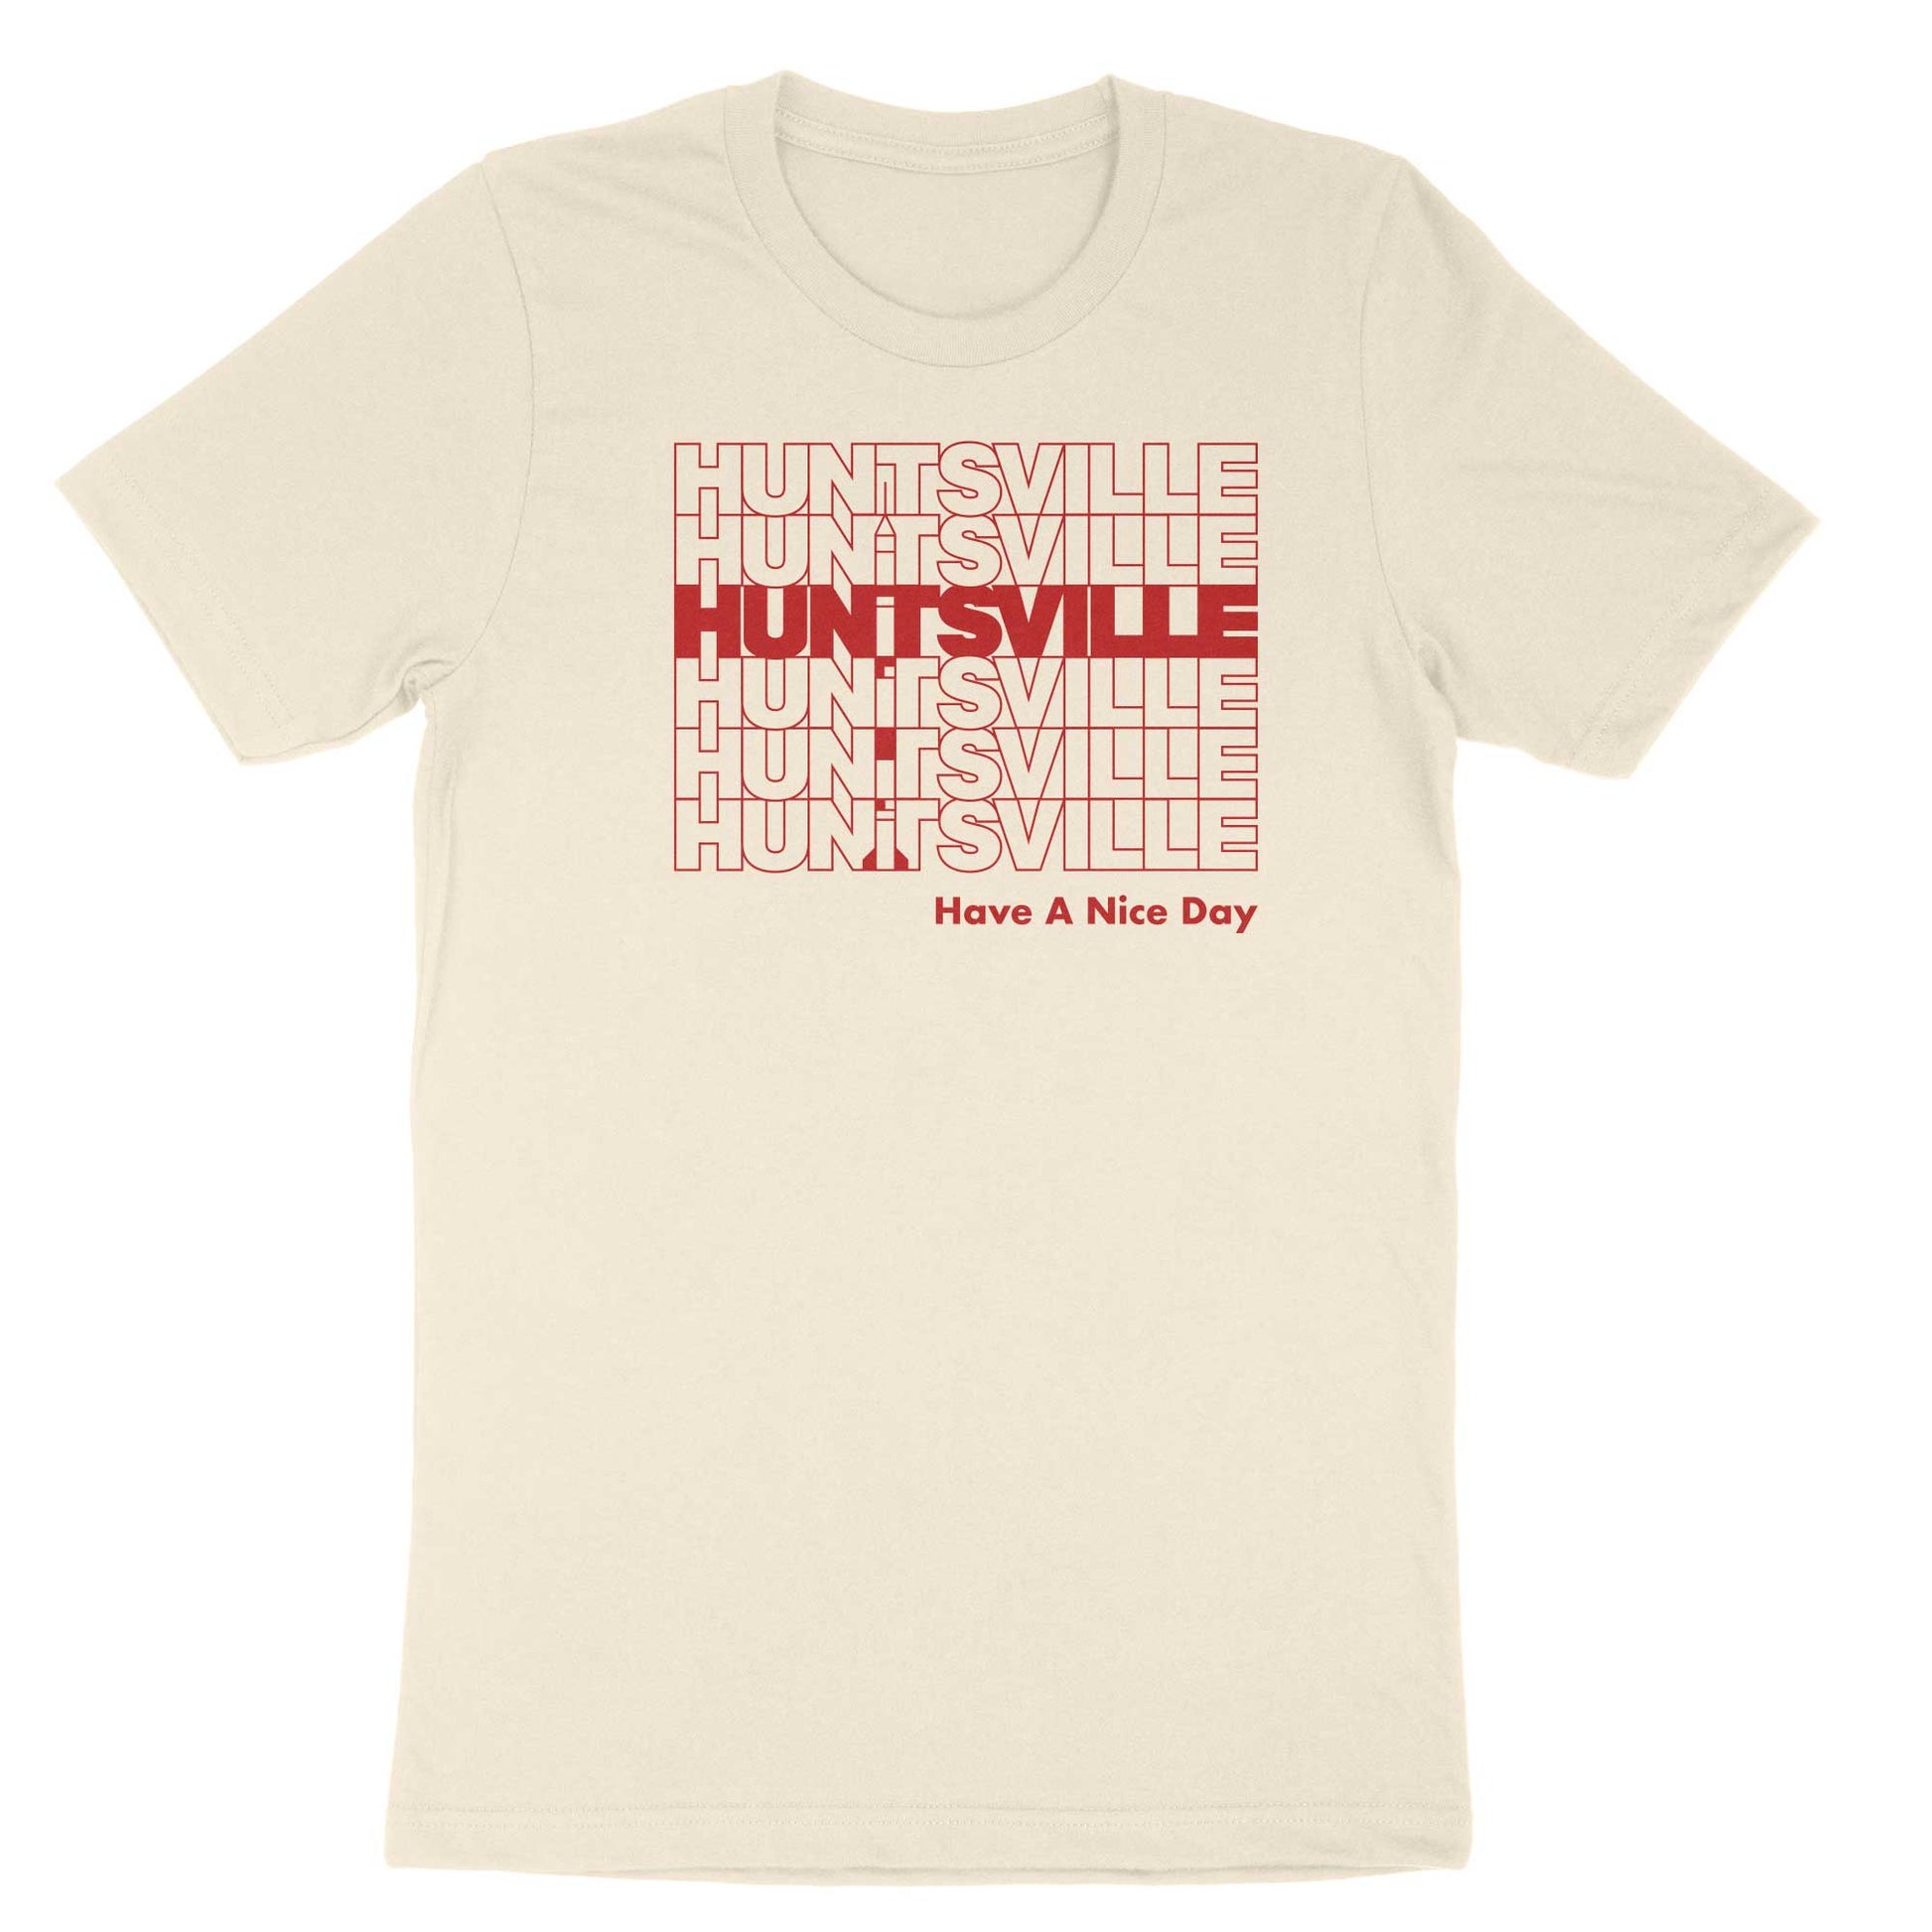 Image of red text "Huntsville Have a Nice Day" on white shirt